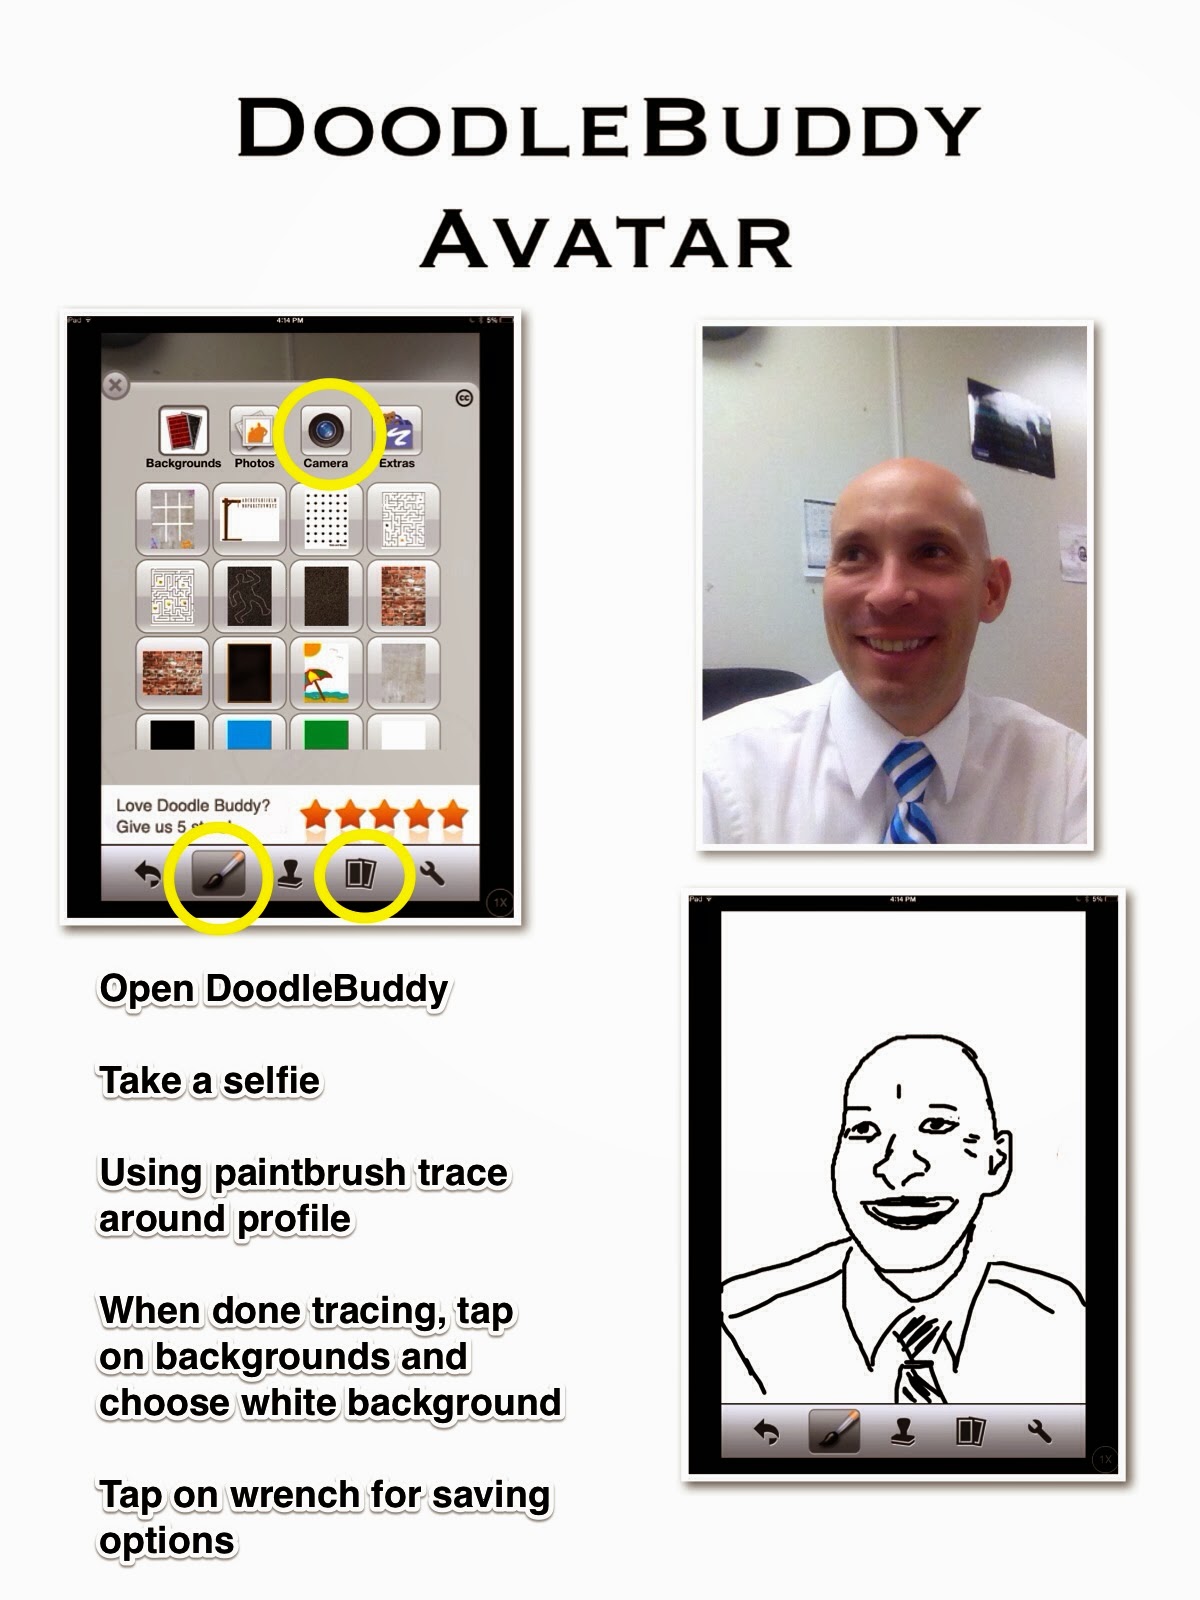 Comfortably 2.0: Creating Avatars with Doodlebuddy App